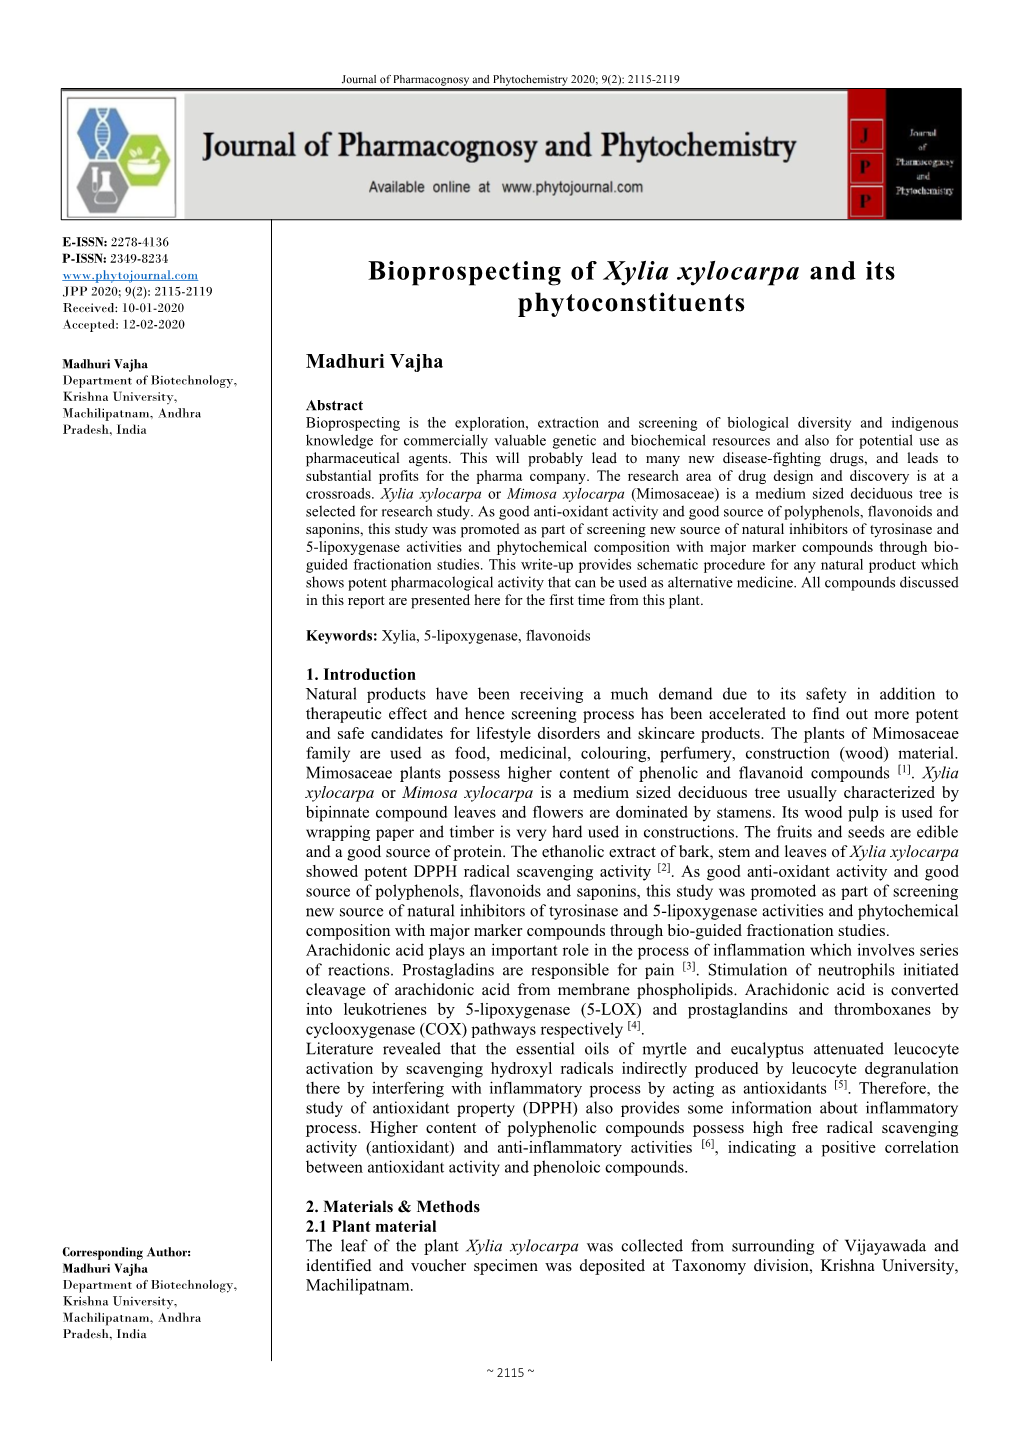 Bioprospecting of Xylia Xylocarpa and Its Phytoconstituents